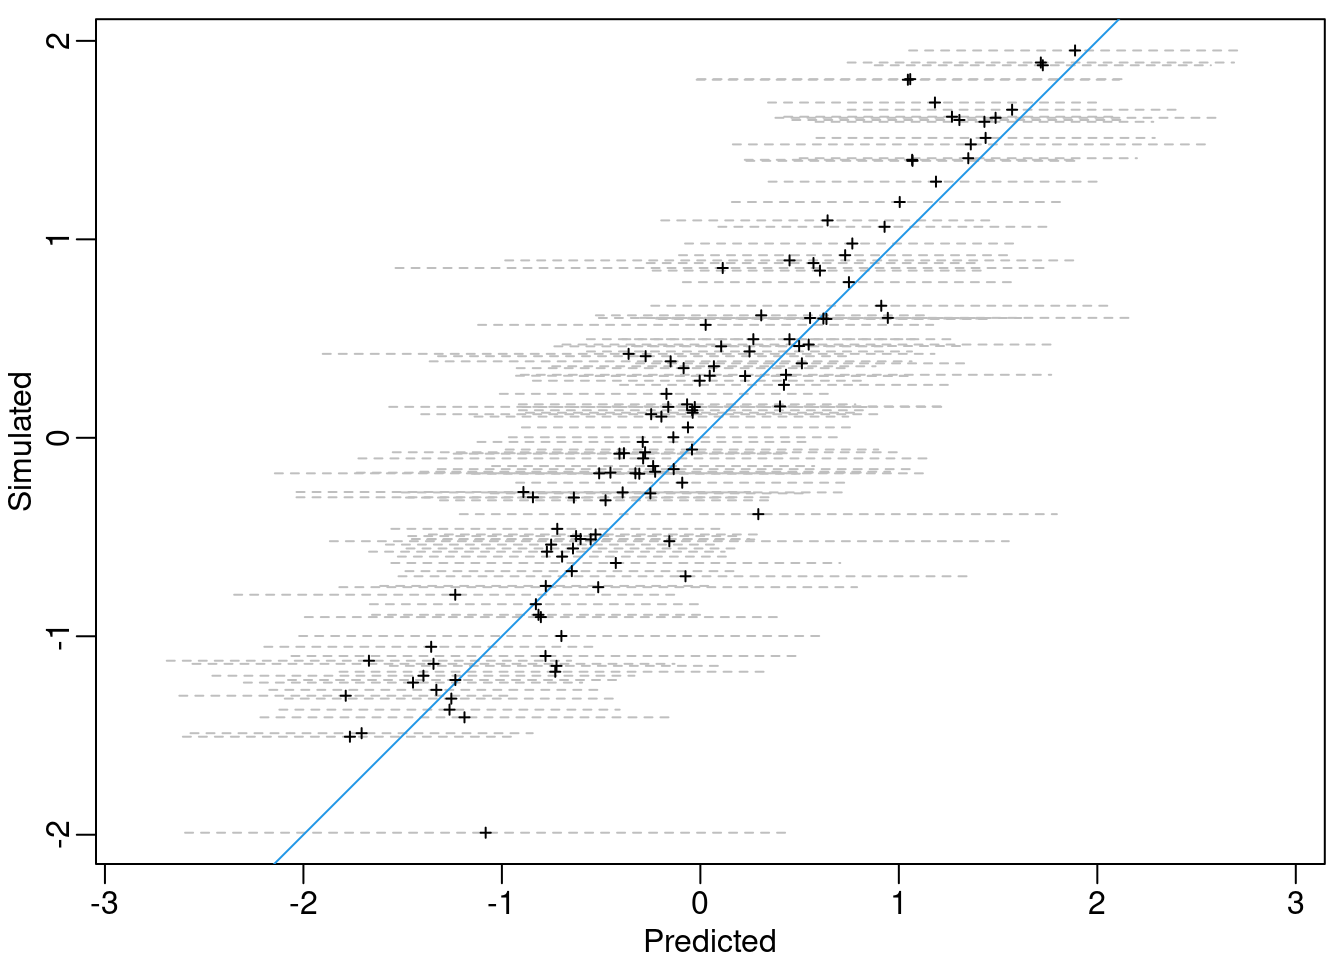 Simulated versus posterior mean of \(\mathbf{m}\) (\(+\)) and the approximated 95% credible intervals (grey dashed lines). The blue line represents the situation when the posterior mean is equal to the simulated values.